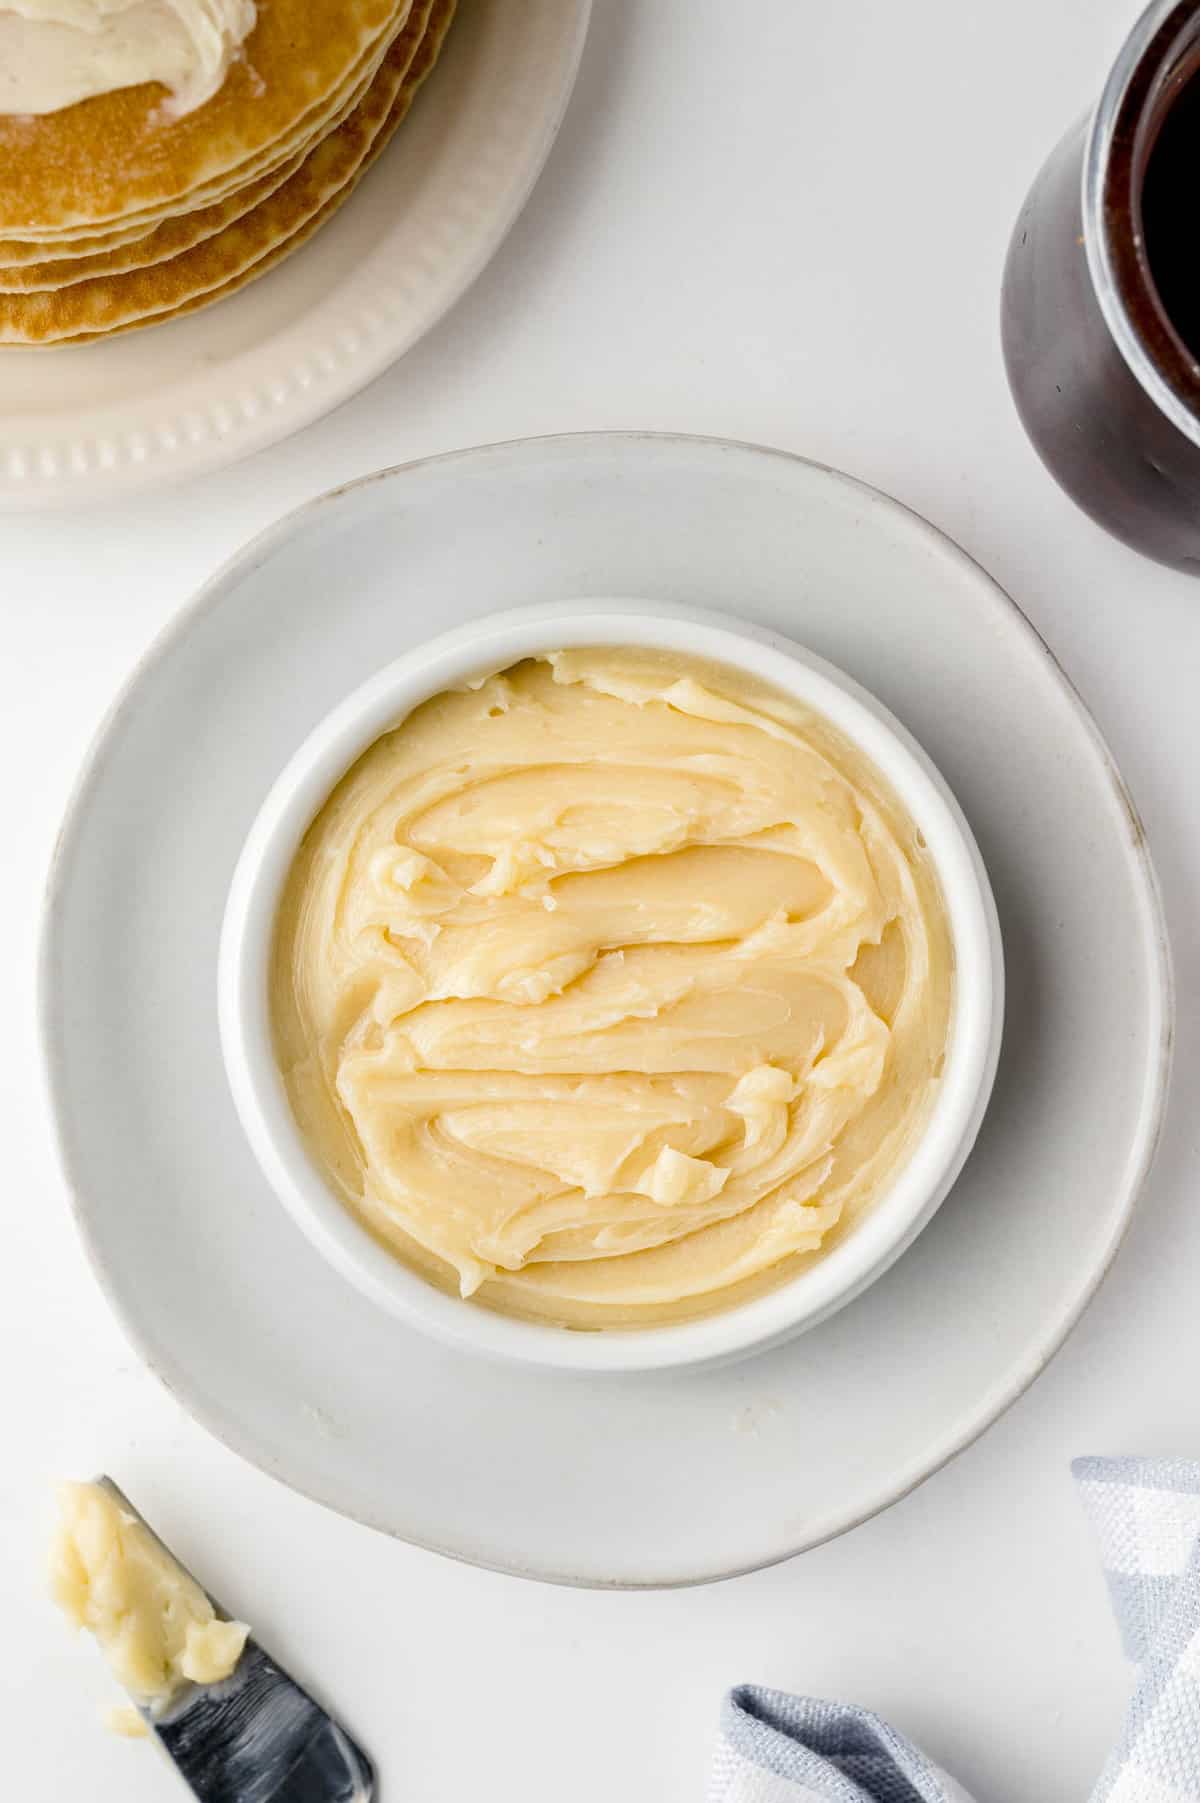 Maple butter in a small round bowl.